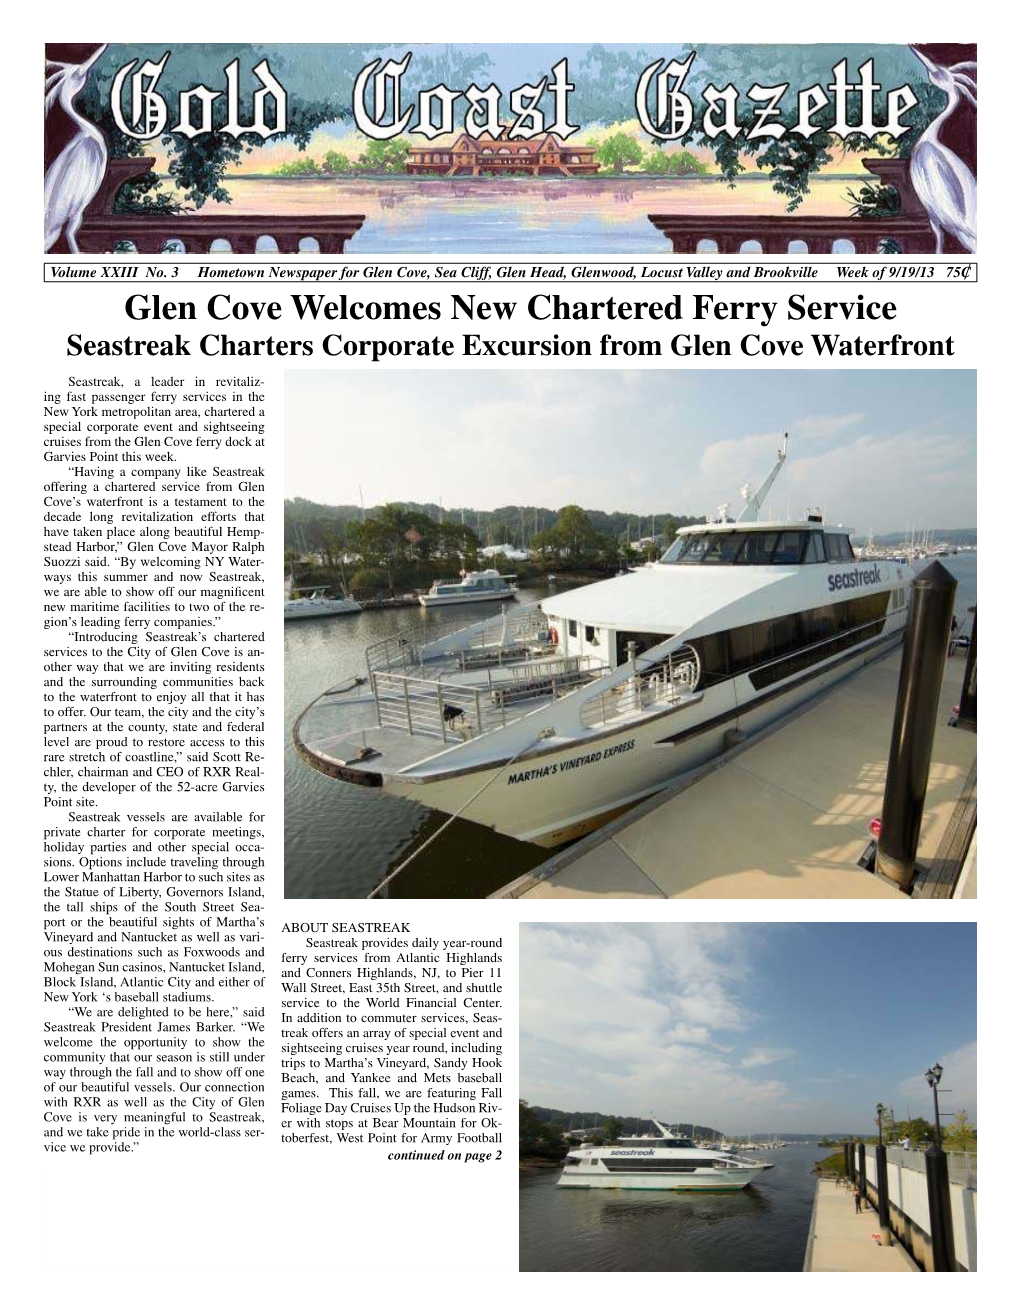 Glen Cove Welcomes New Chartered Ferry Service Seastreak Charters Corporate Excursion from Glen Cove Waterfront